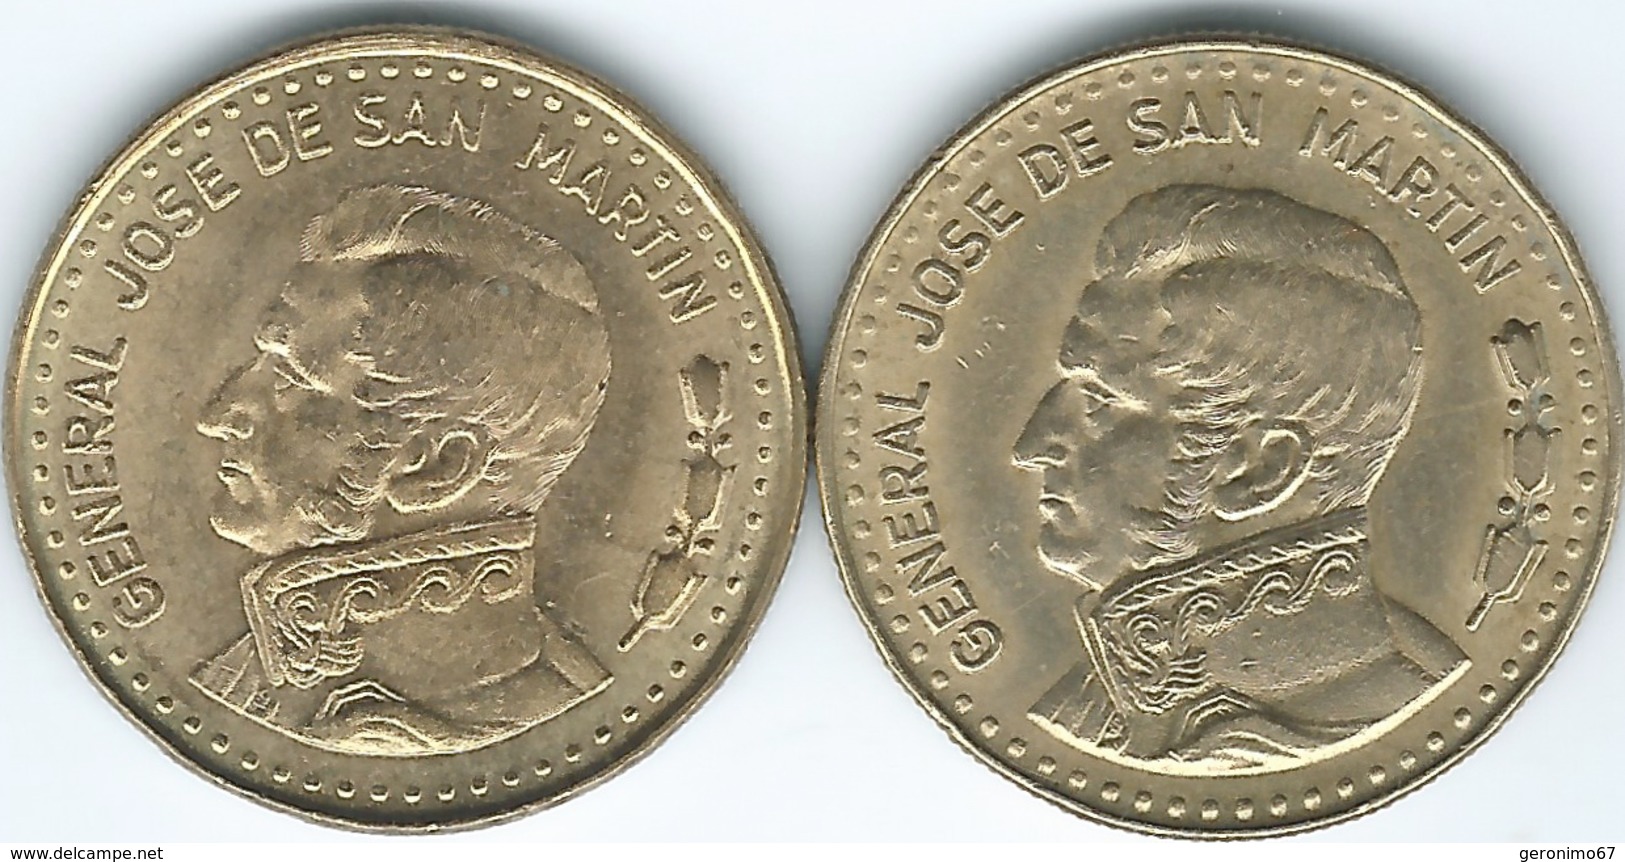 Argentina - 50 Pesos - 1979 (non Magnetic - KM83) & 1981 (magnetic - KM83a) - Argentine